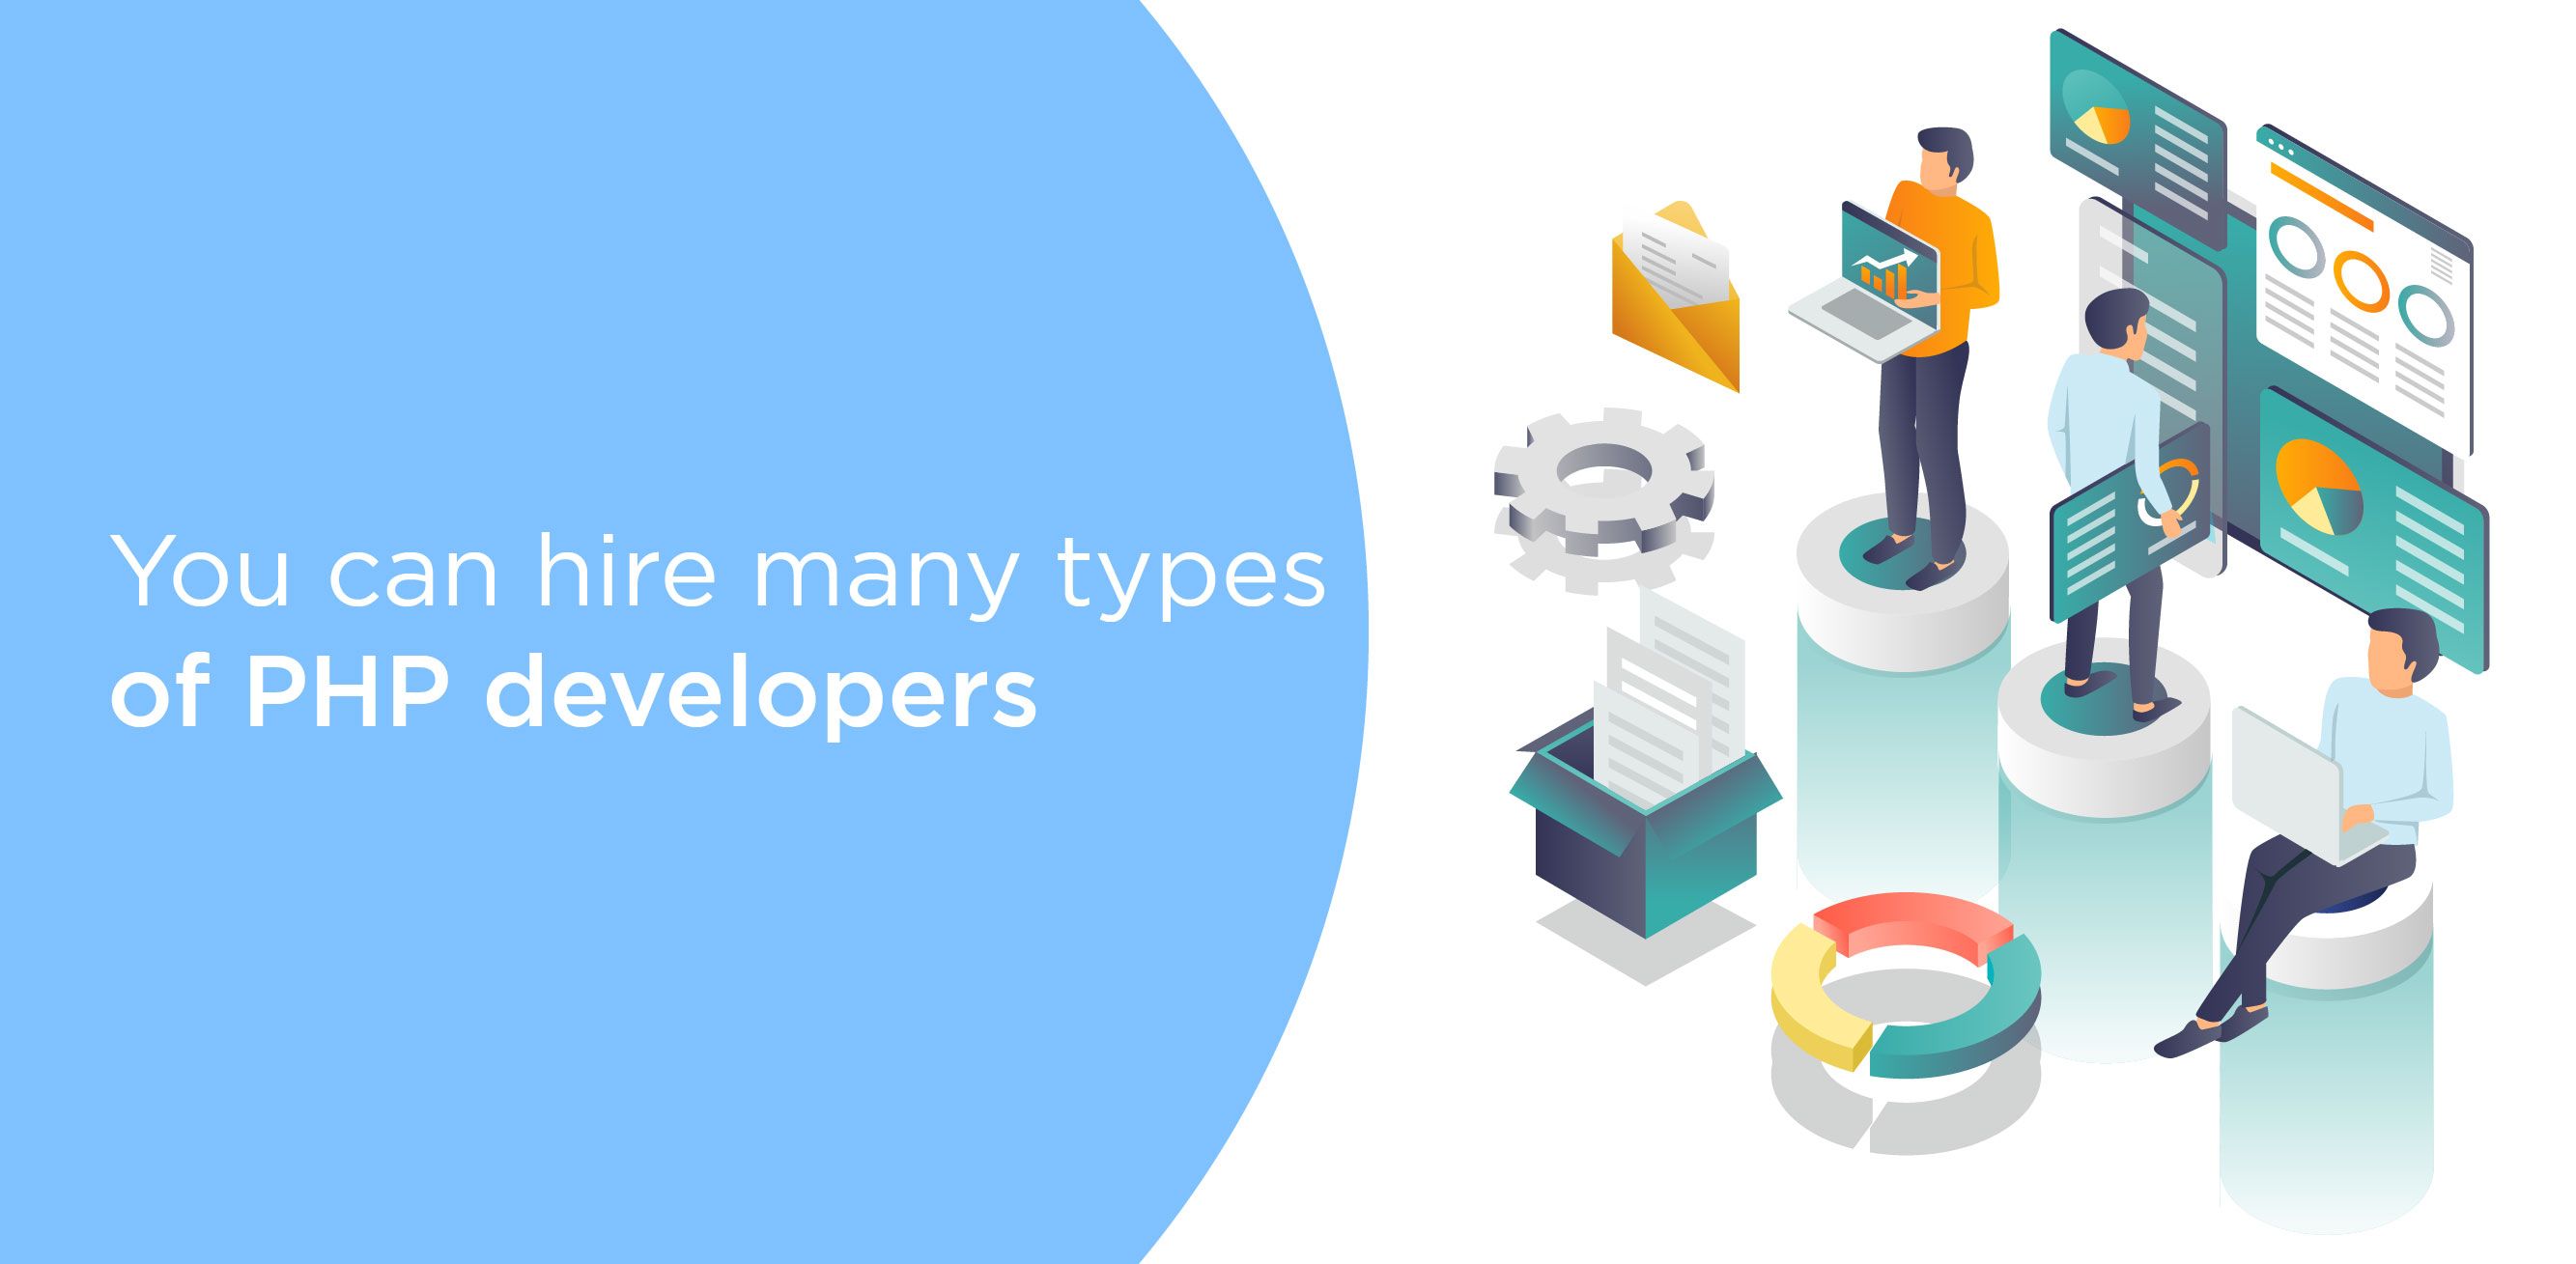 You can hire many types of PHP developers